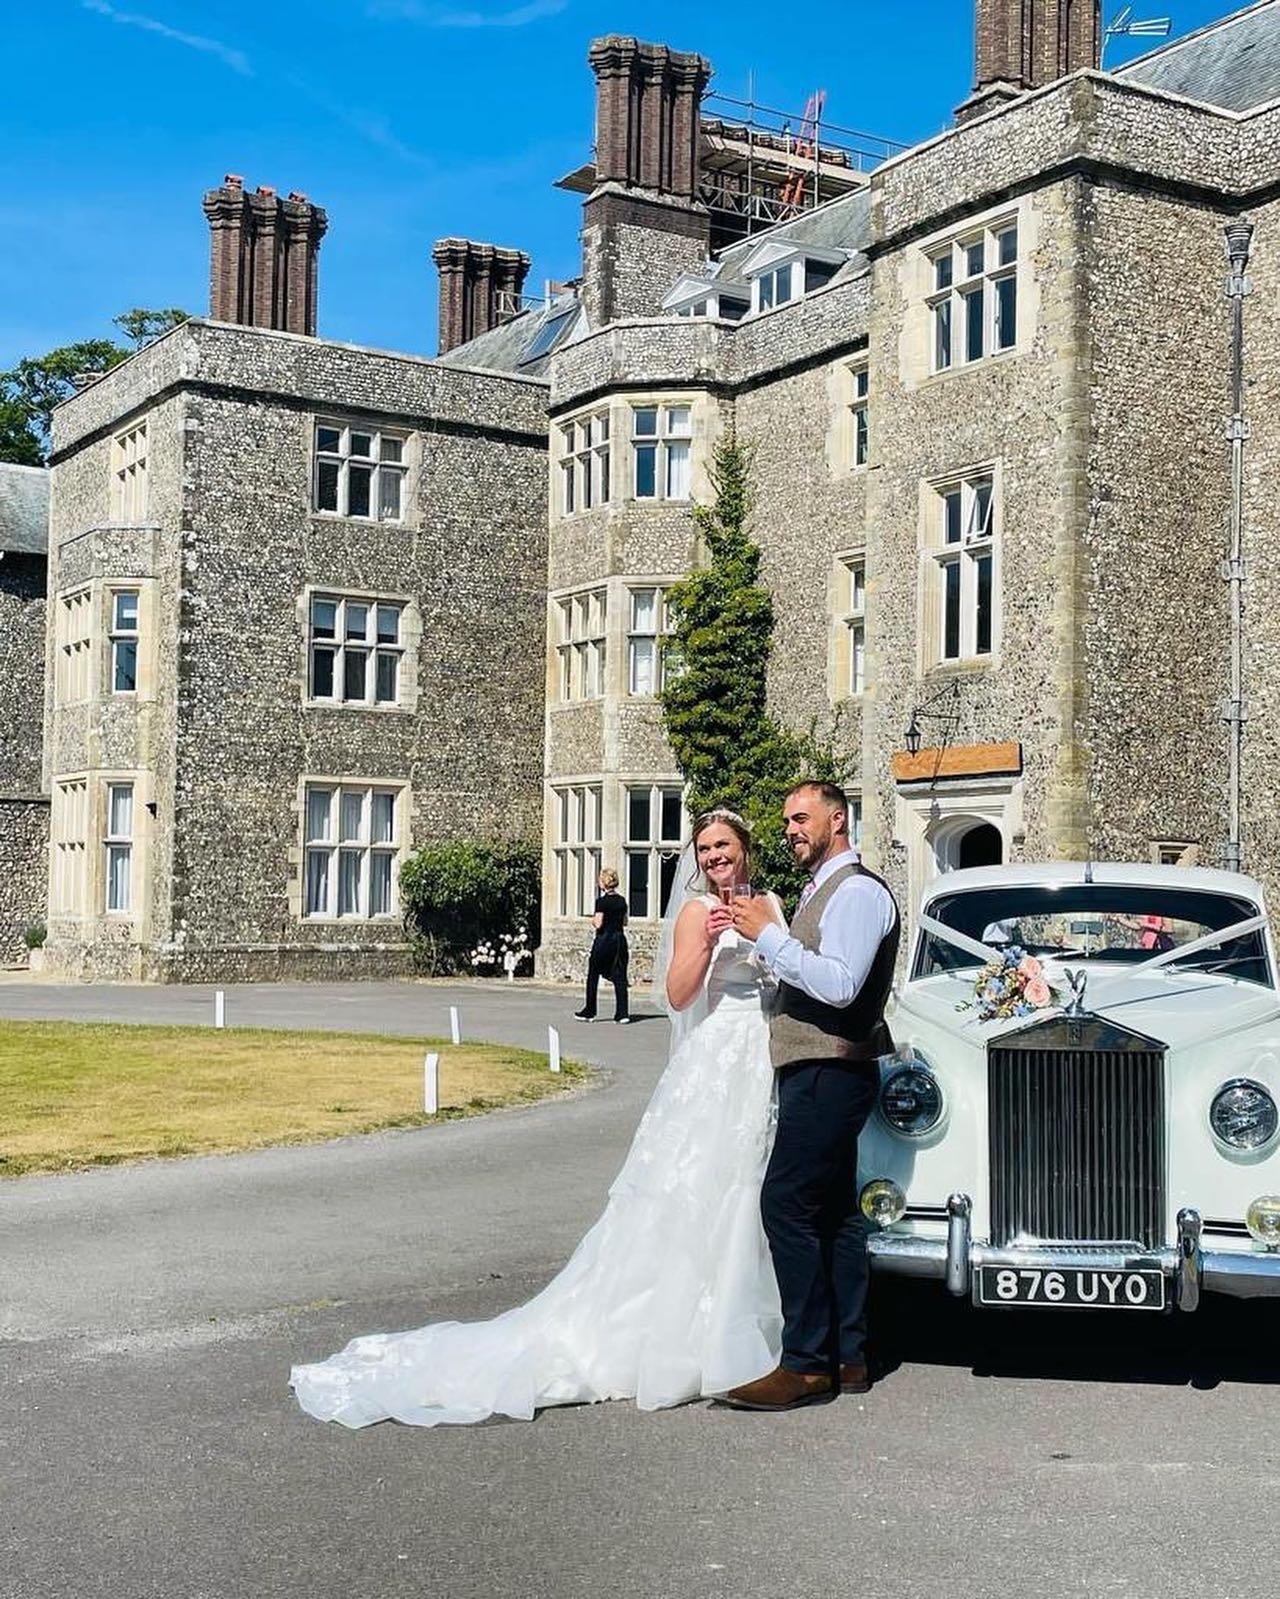 Some beautiful pictures of one of our weddings at Slindon House. What more can we say 😍.

Photo credit to @footprints_through_the_lens